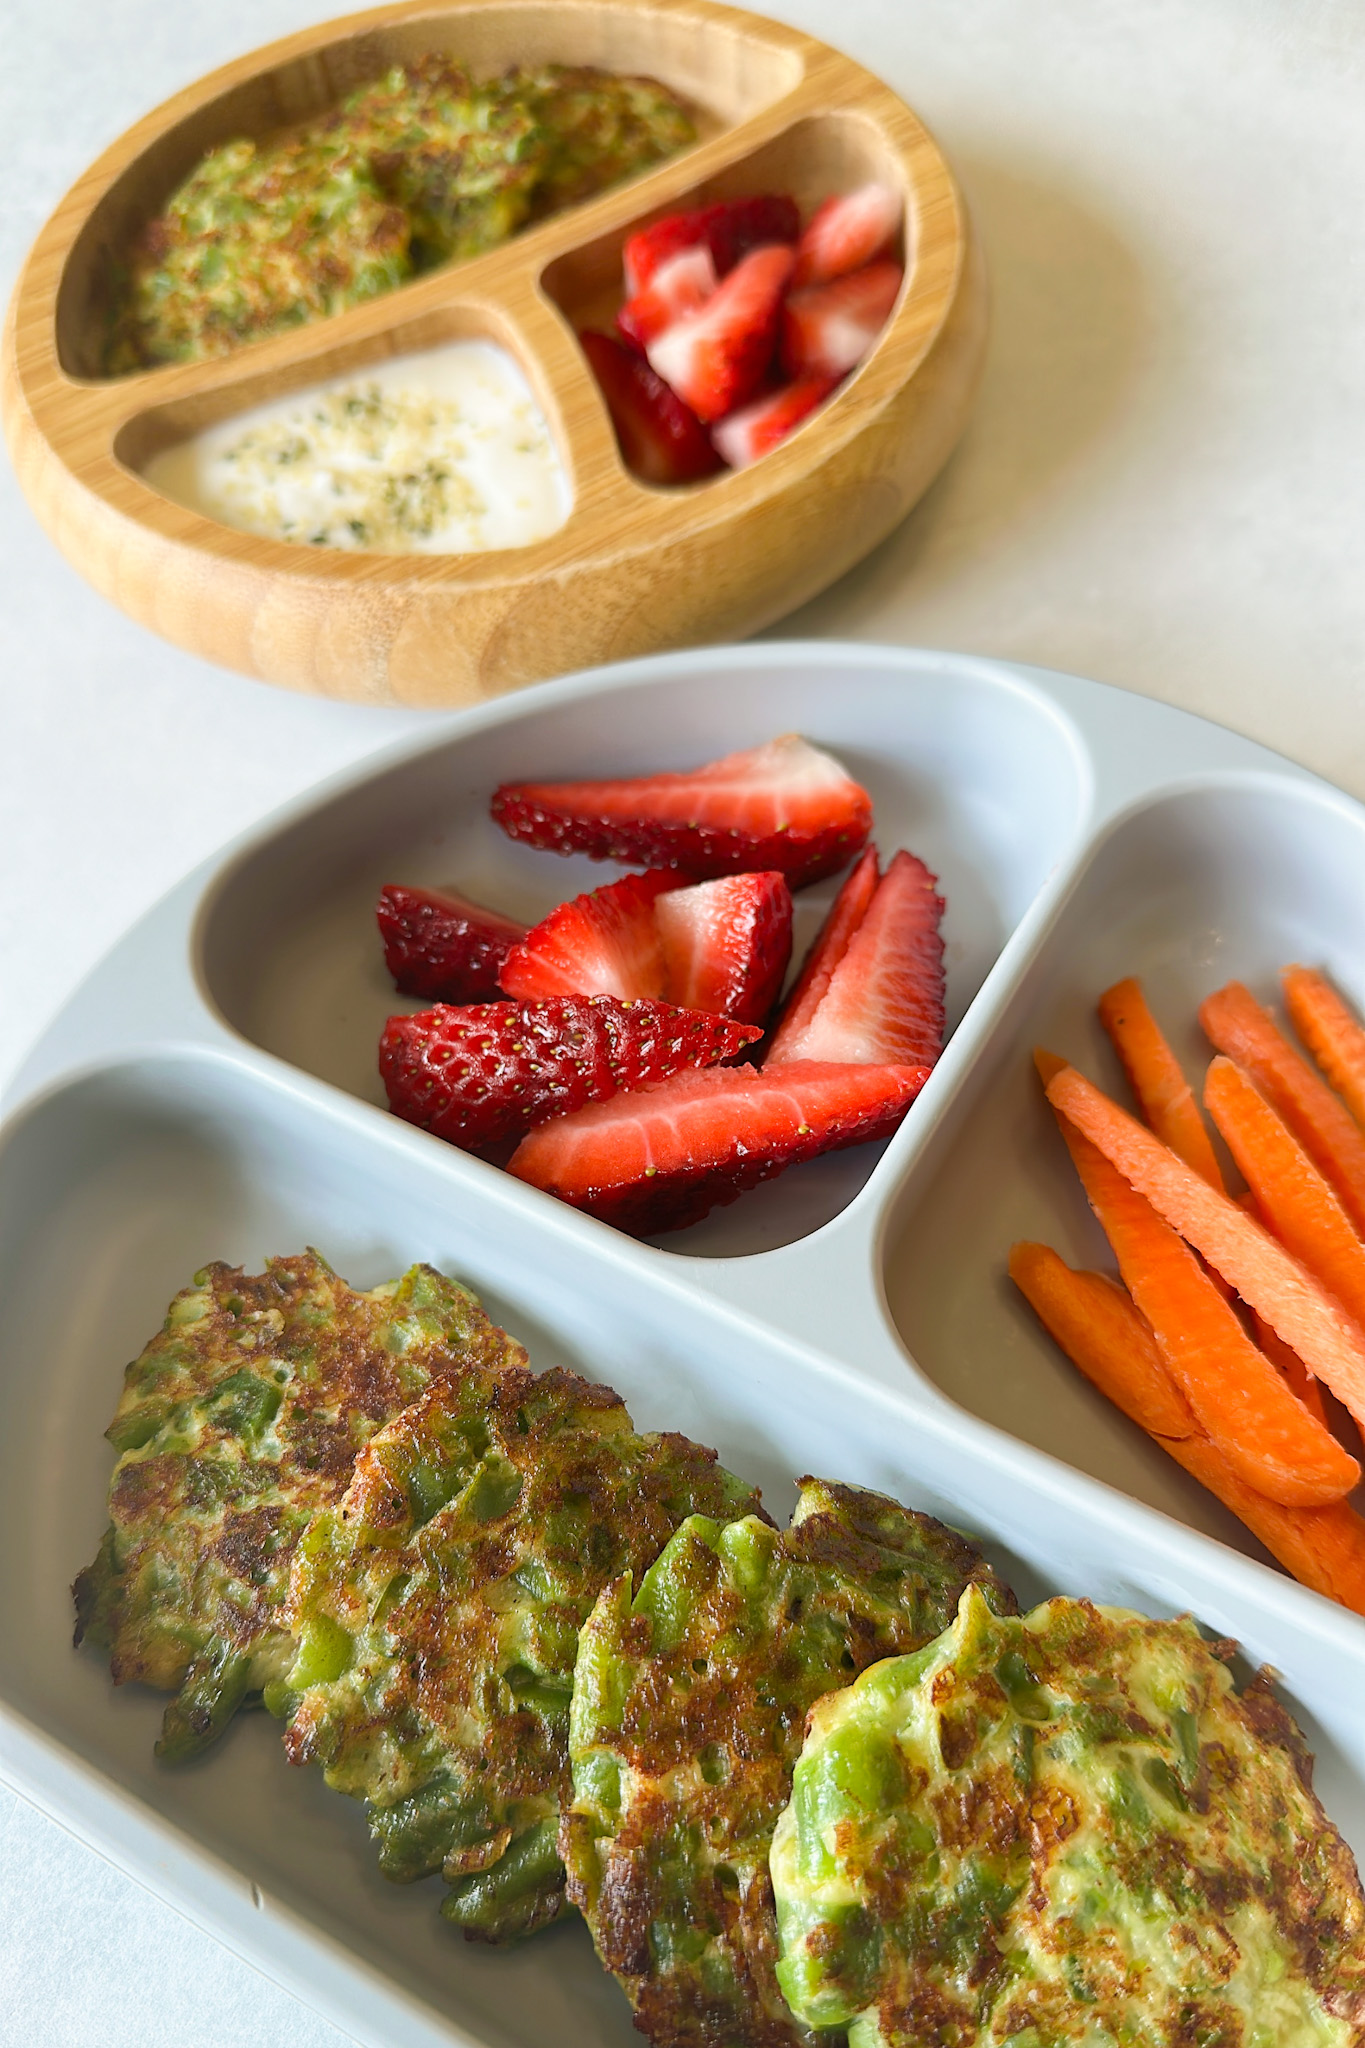 Green bean fritters served with strawberries and carrots.